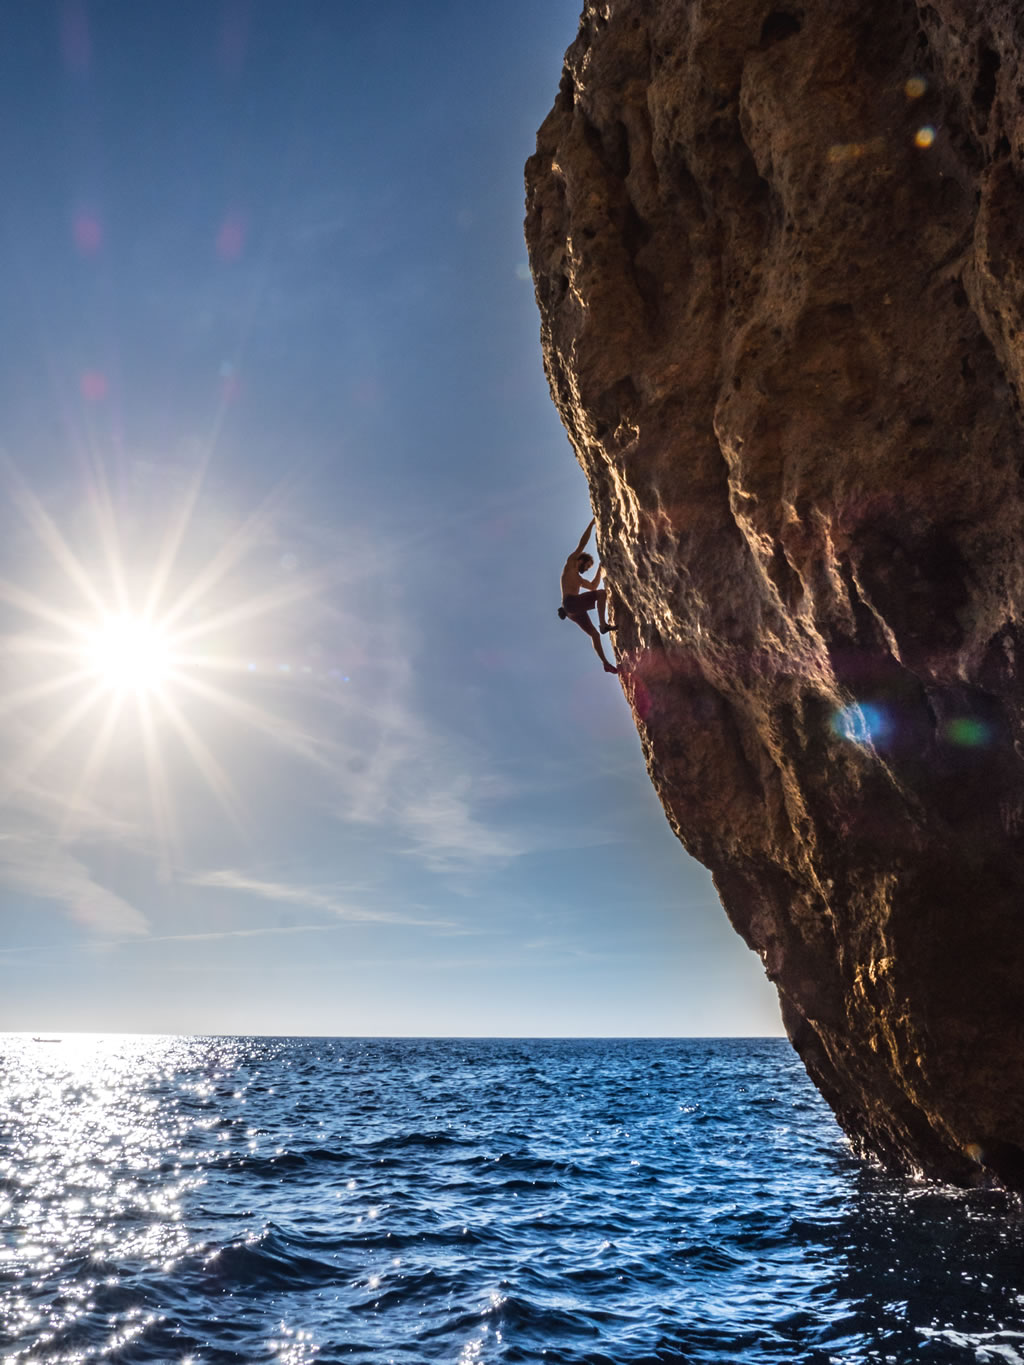 climber Chris Sharma grips a vertical rock wall with little overhang over the sea in a landscape with the sea and sky with shinning sun